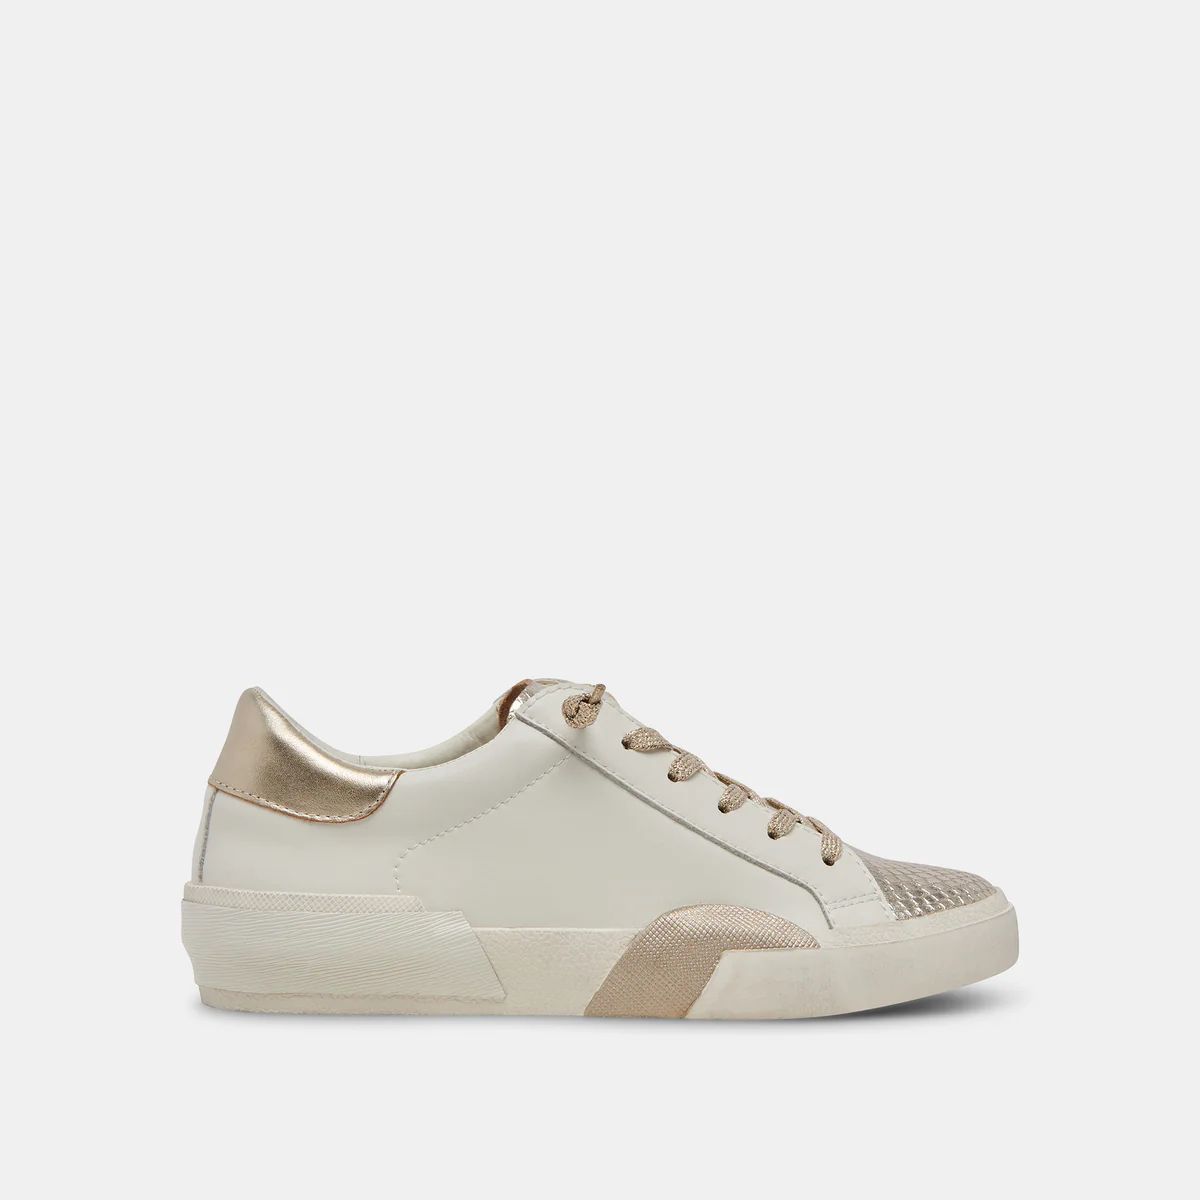 ZINA SNEAKERS WHITE GOLD LEATHER | DolceVita.com